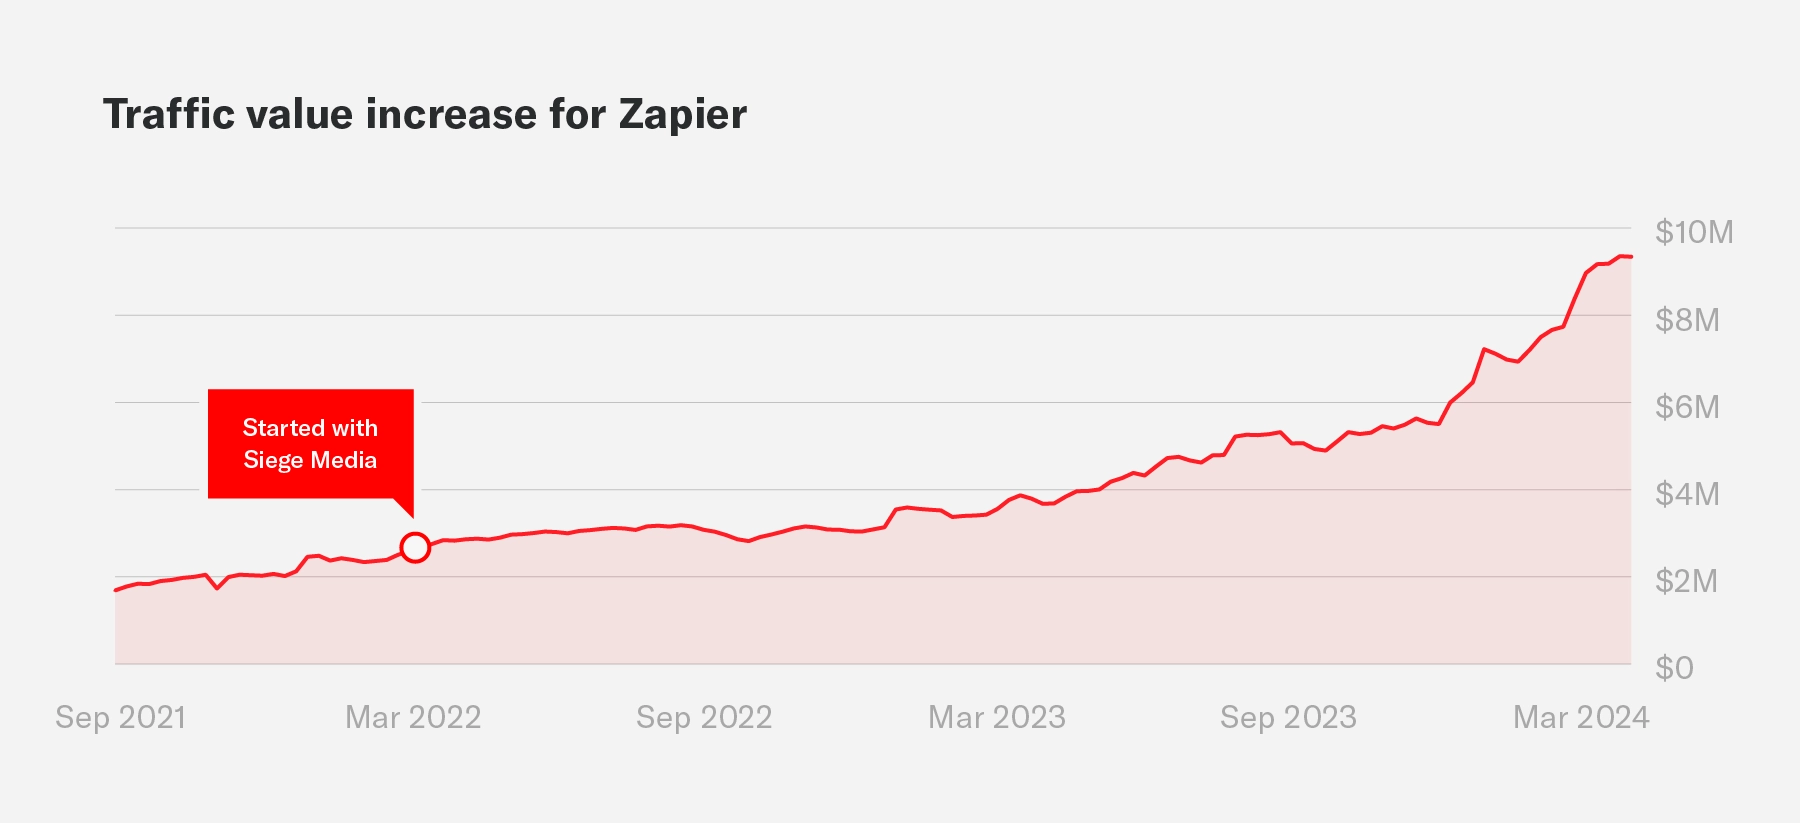 A graph showing Zapier's traffic value growth during an engagement with Siege Media.